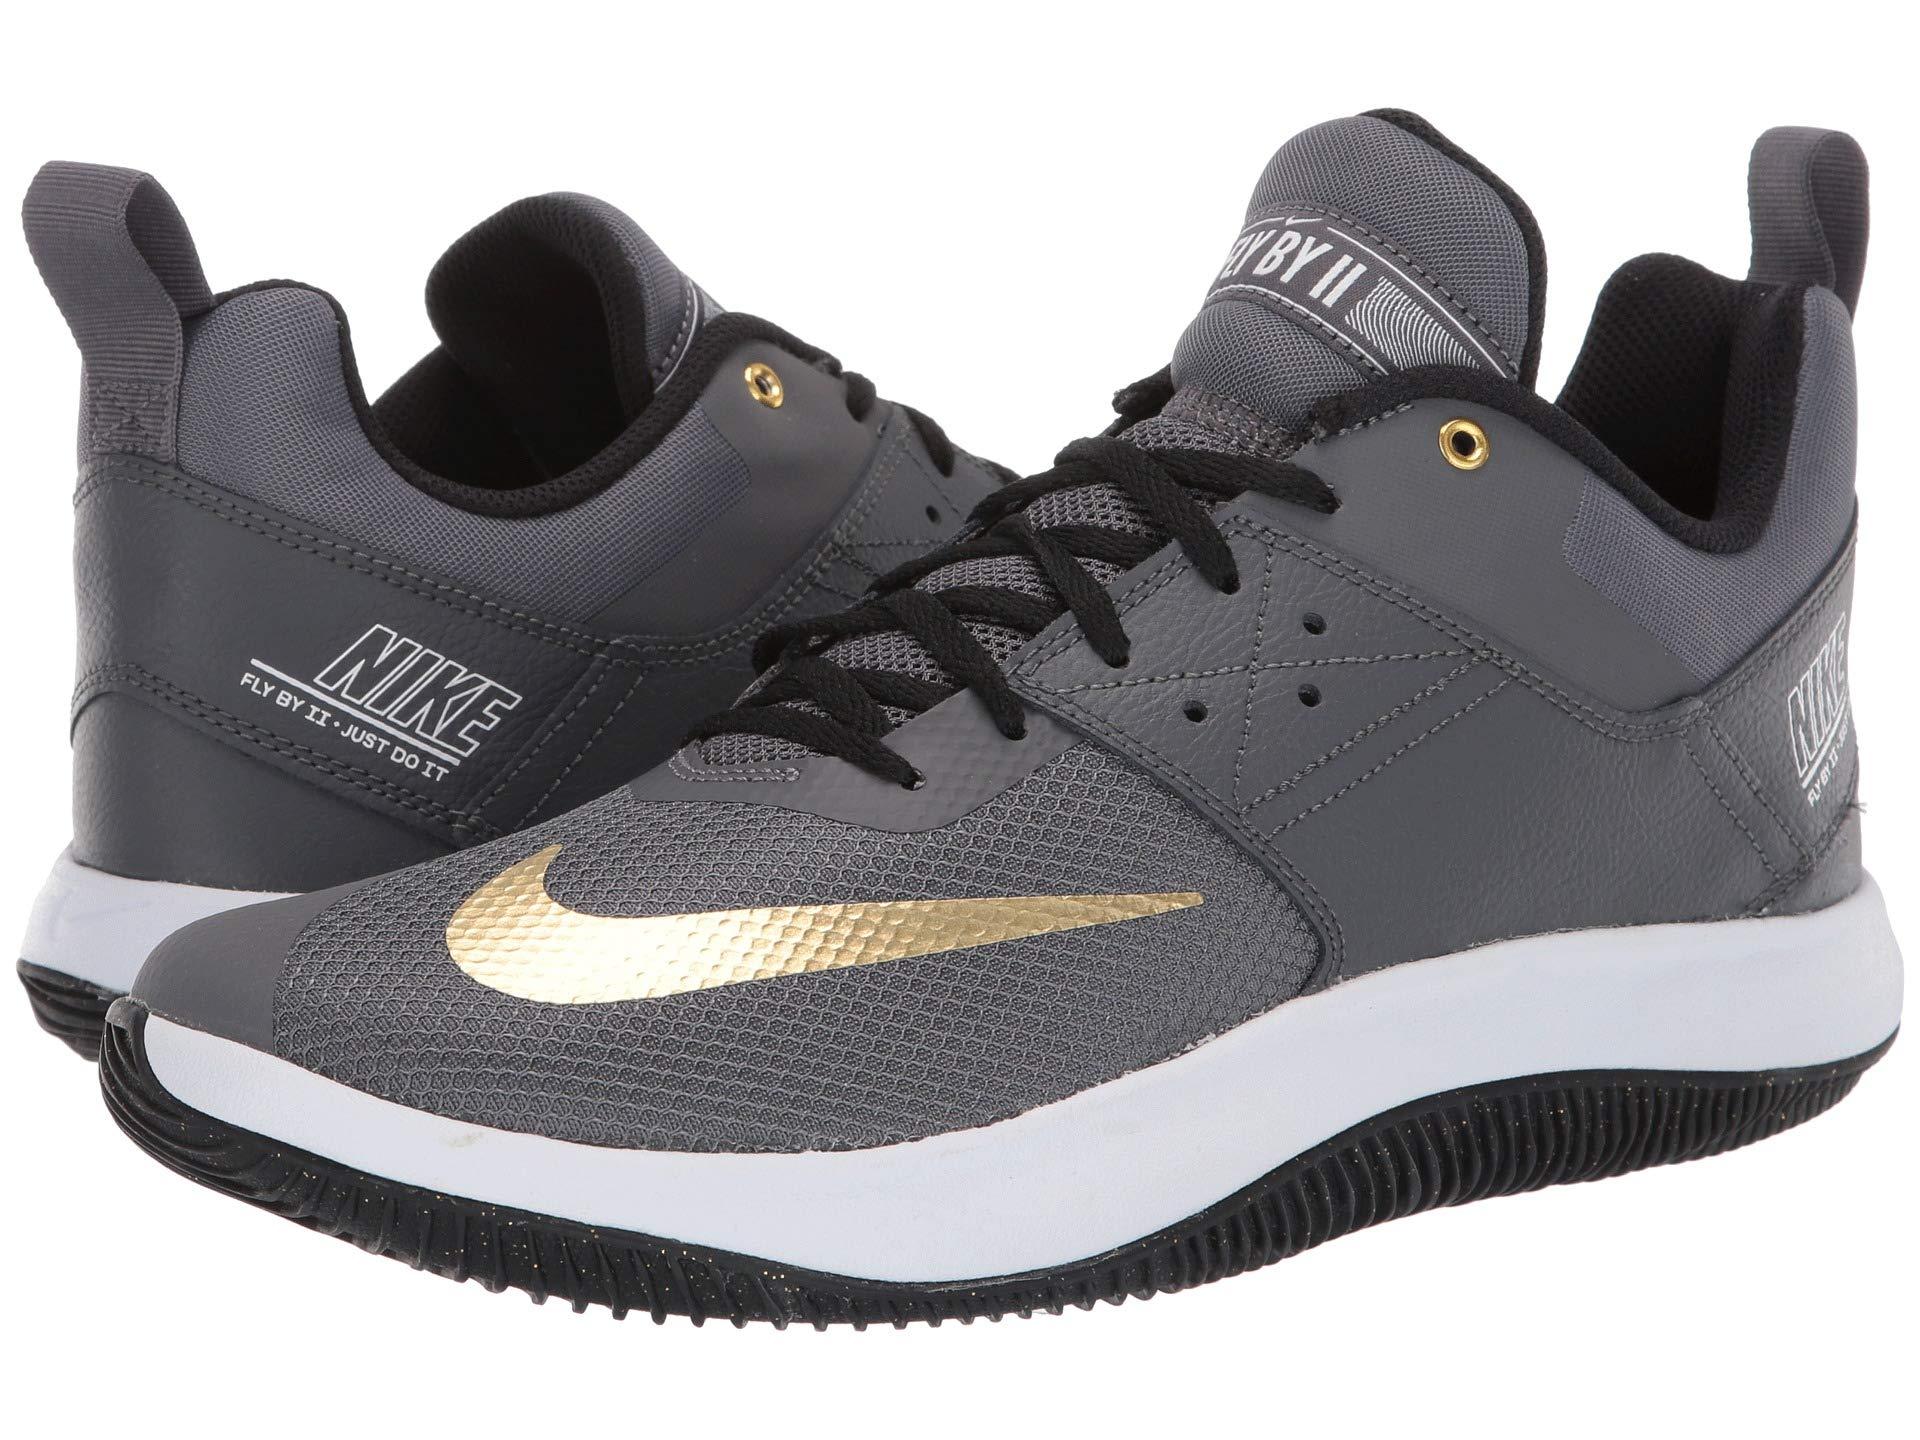 nike flyby low black and gold